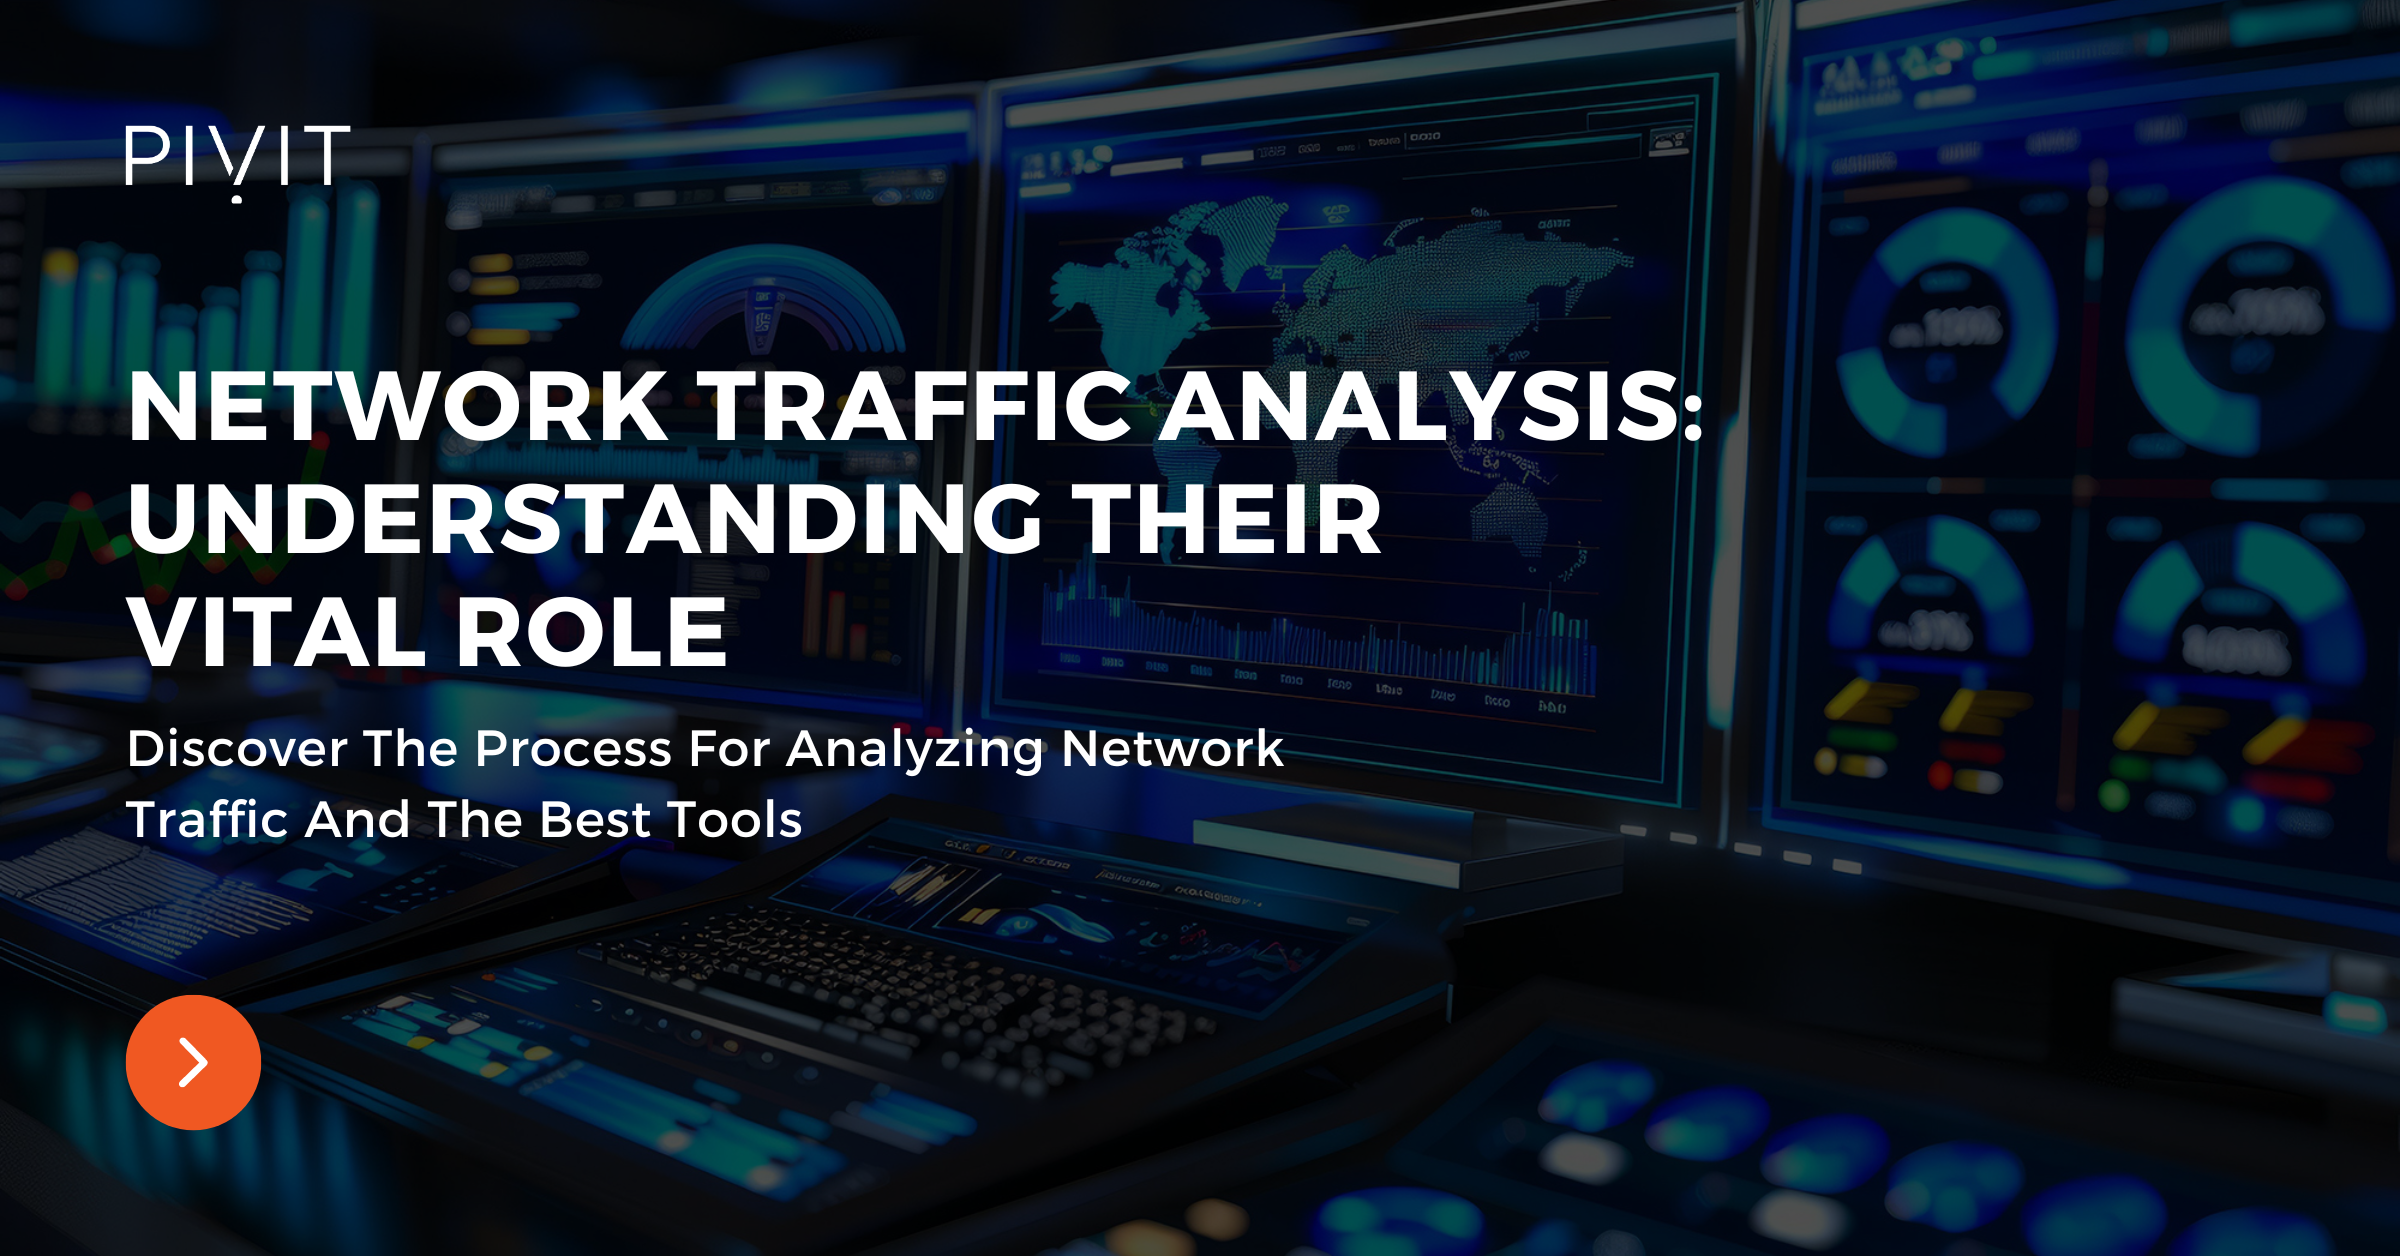 Network Traffic Analysis: Understanding Their Vital Role - Discover The Process For Analyzing Network Traffic And The Best Tools